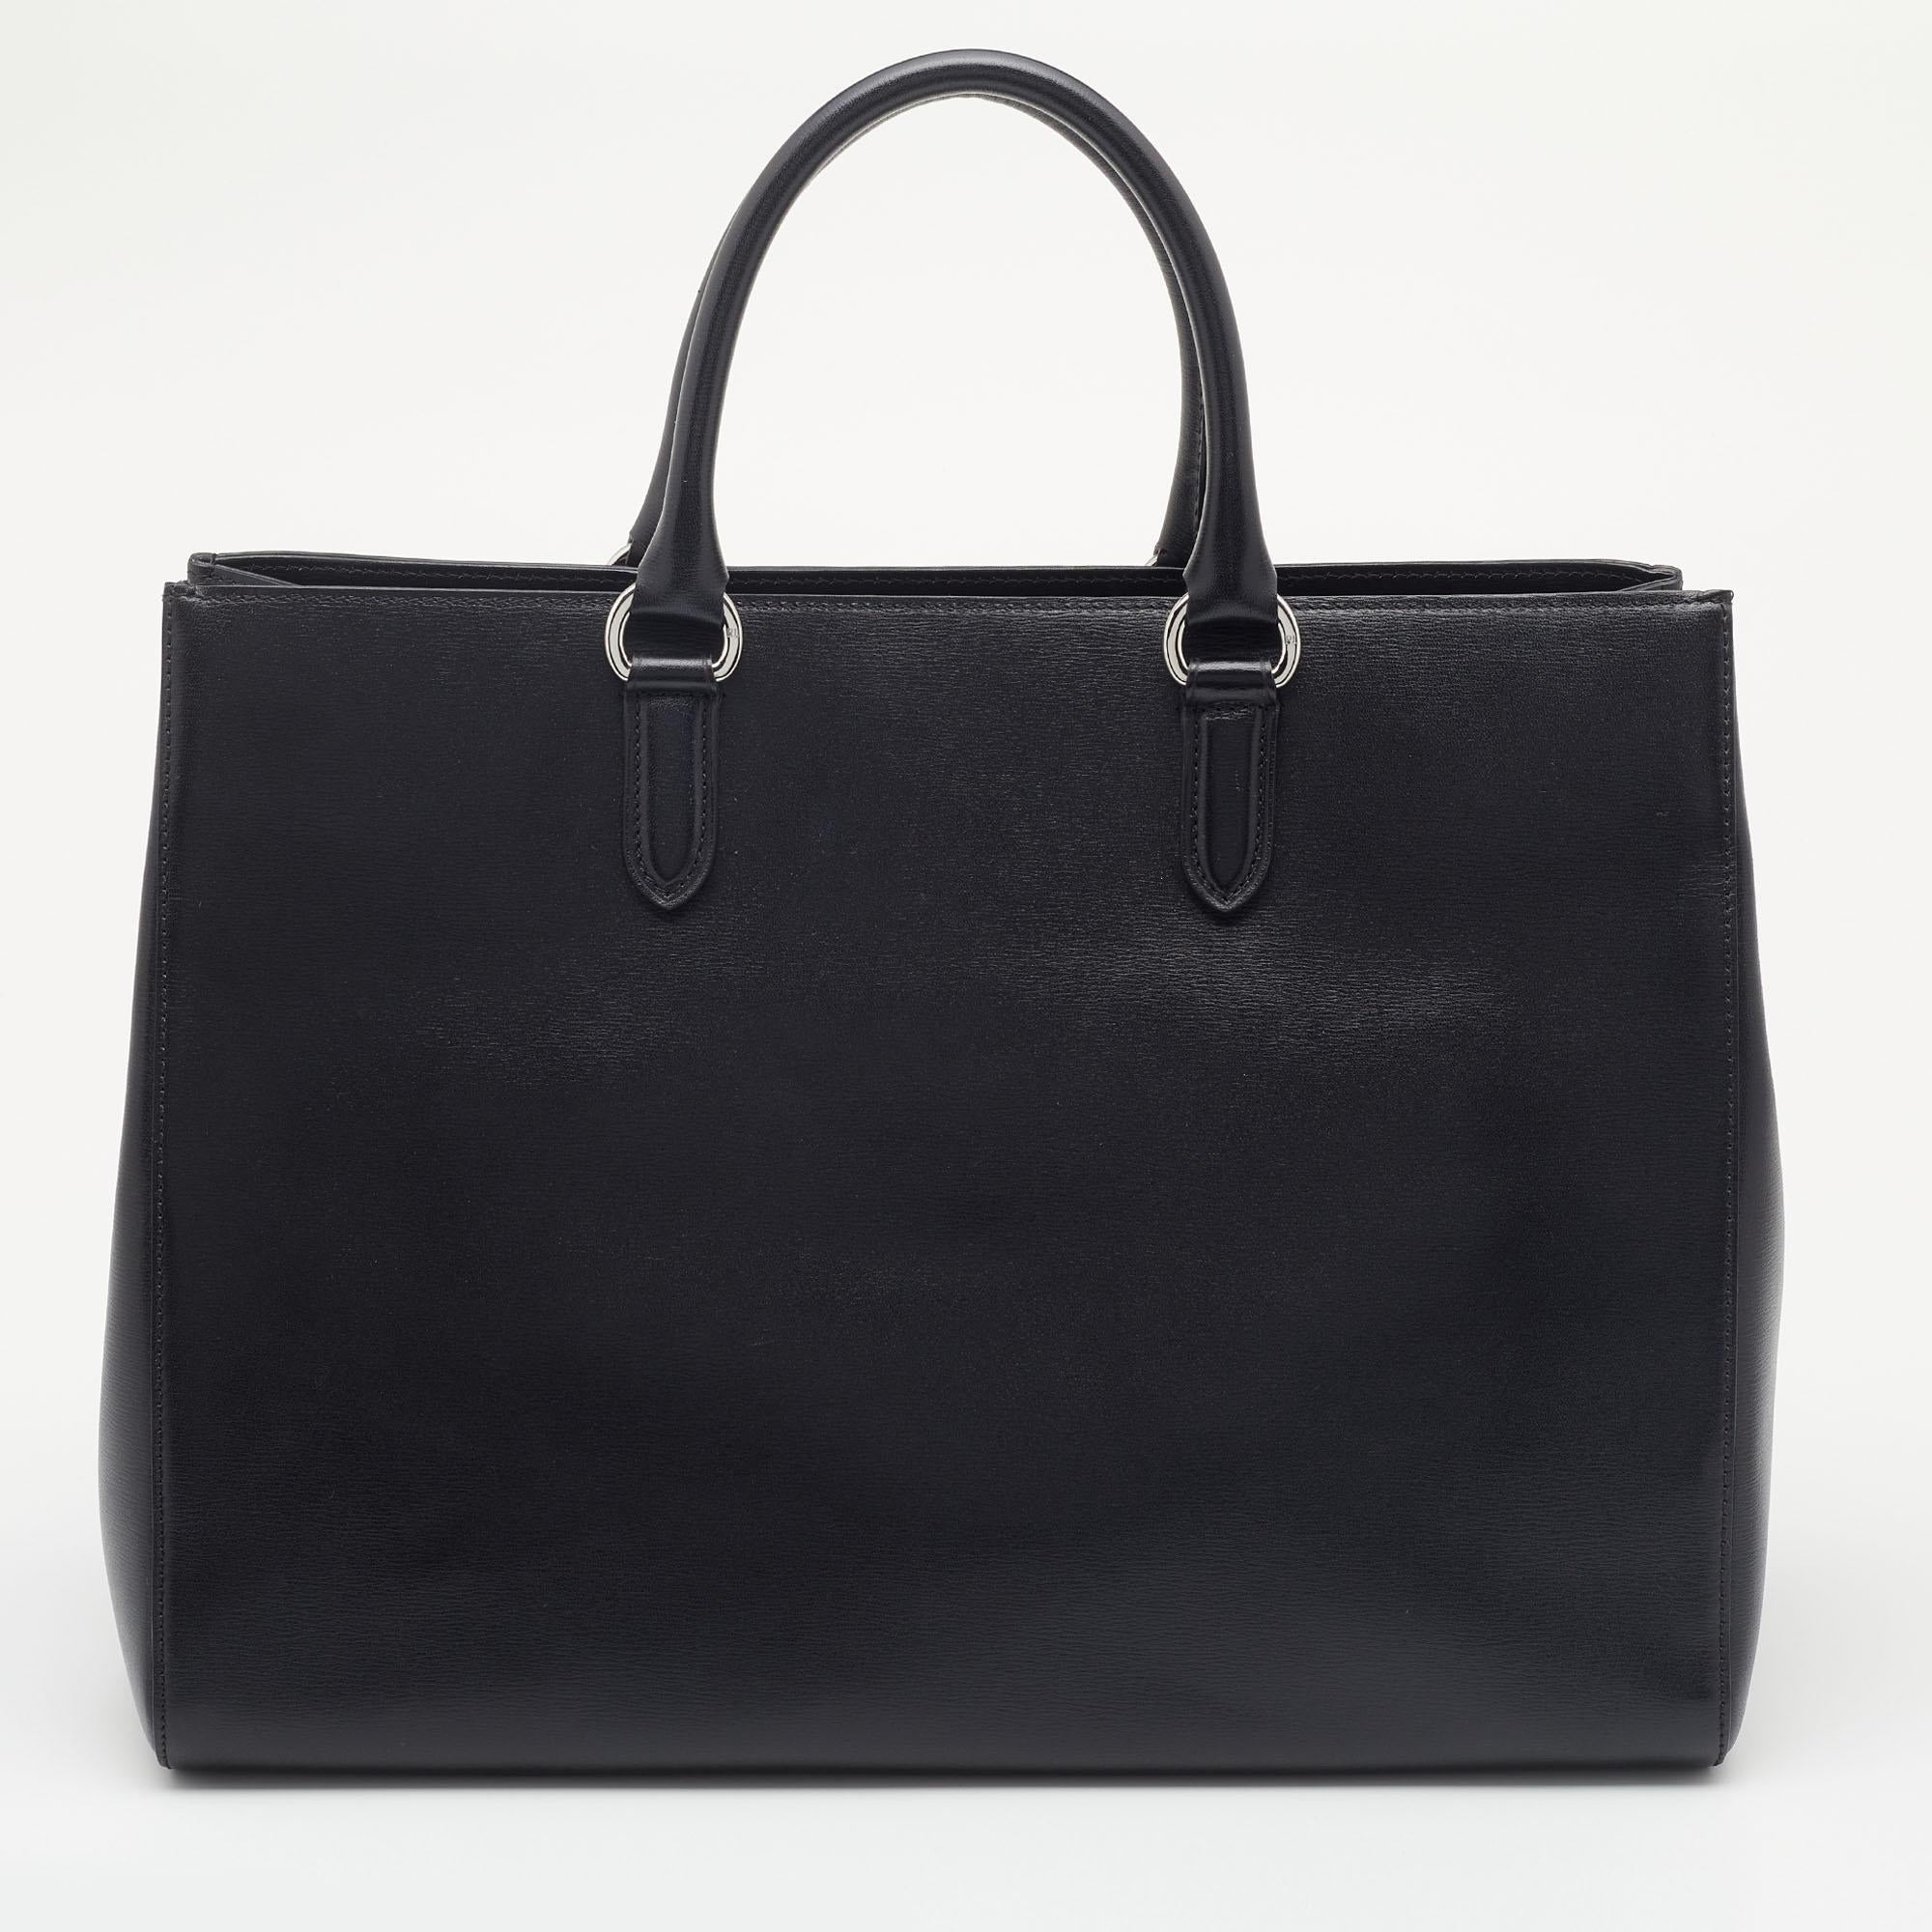 This tote from Ralph Lauren is attractive, sturdy, and practical for everyday use. It is crafted using black leather on the exterior. It showcases two handles, silver-toned hardware, and a fabric-lined interior. Own this superb Ralph Lauren creation